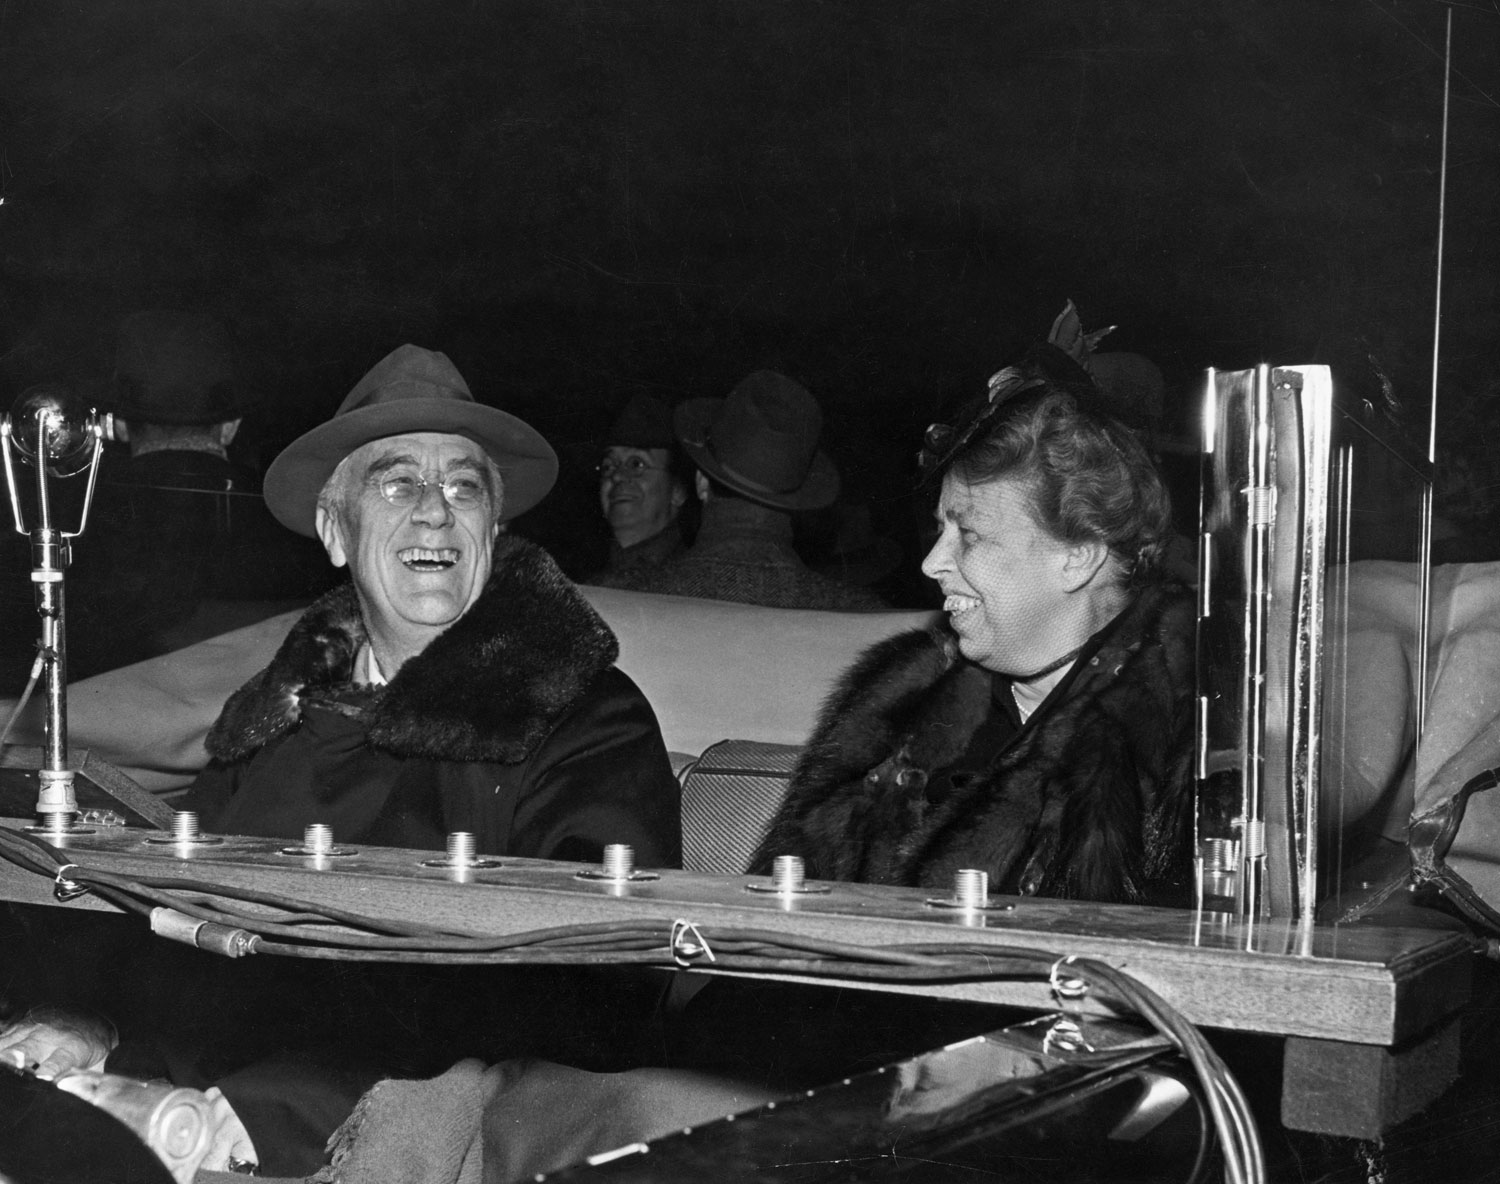 President Franklin D. Roosevelt and his wife Eleanor in front of broadcast microphones mounted on a plank across the backseat of their limousine during a stop in Hyde Park, NY, 1944.